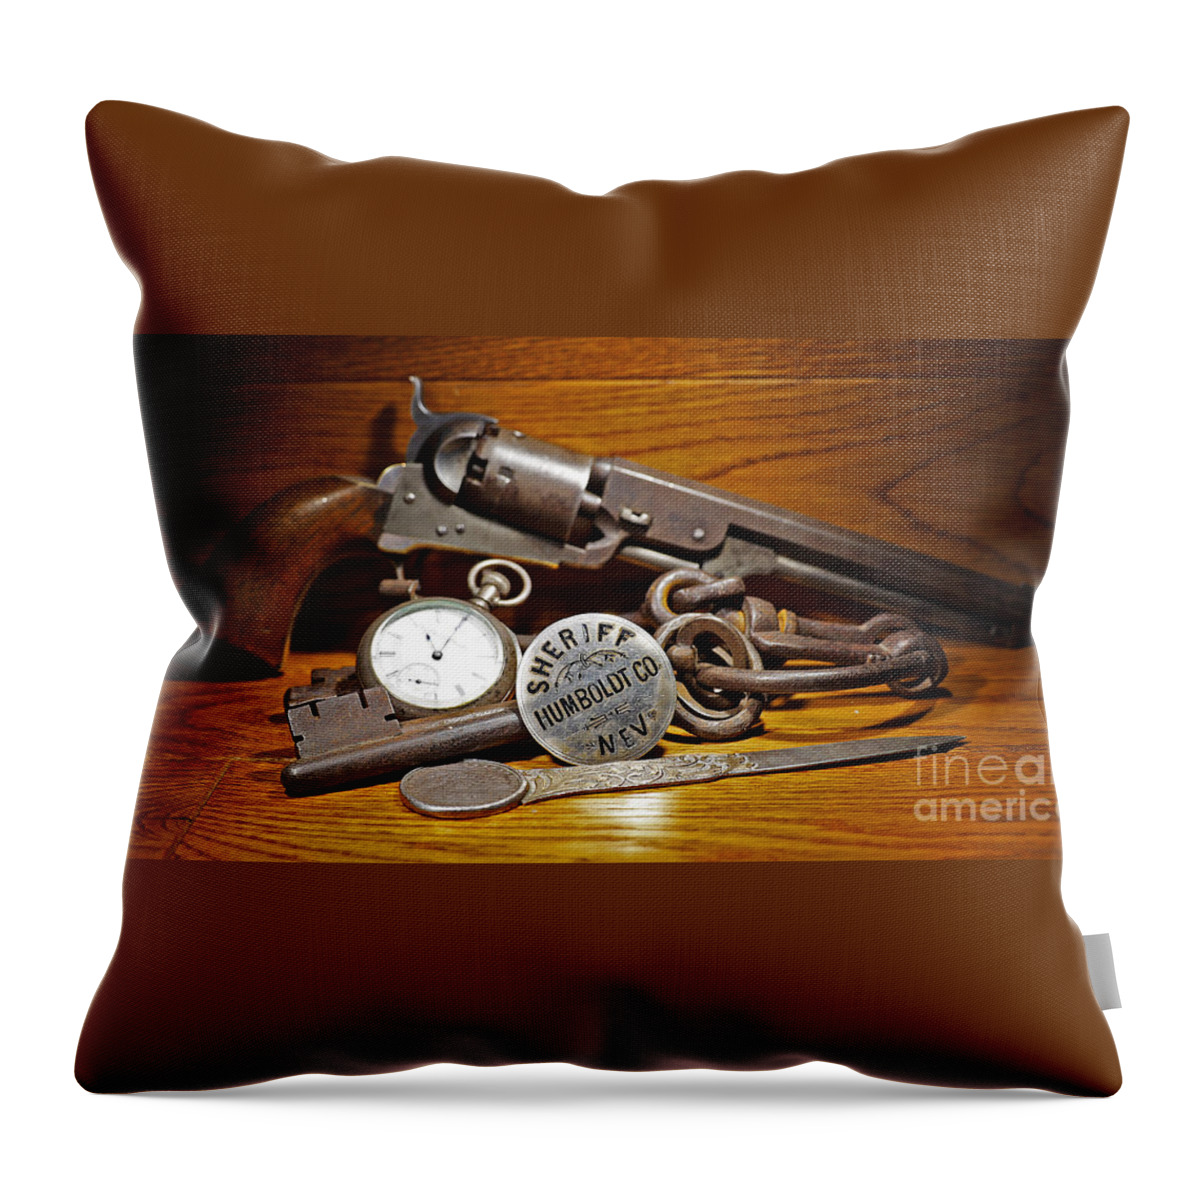 Police Throw Pillow featuring the photograph Nevada Lawman by Doug Gist